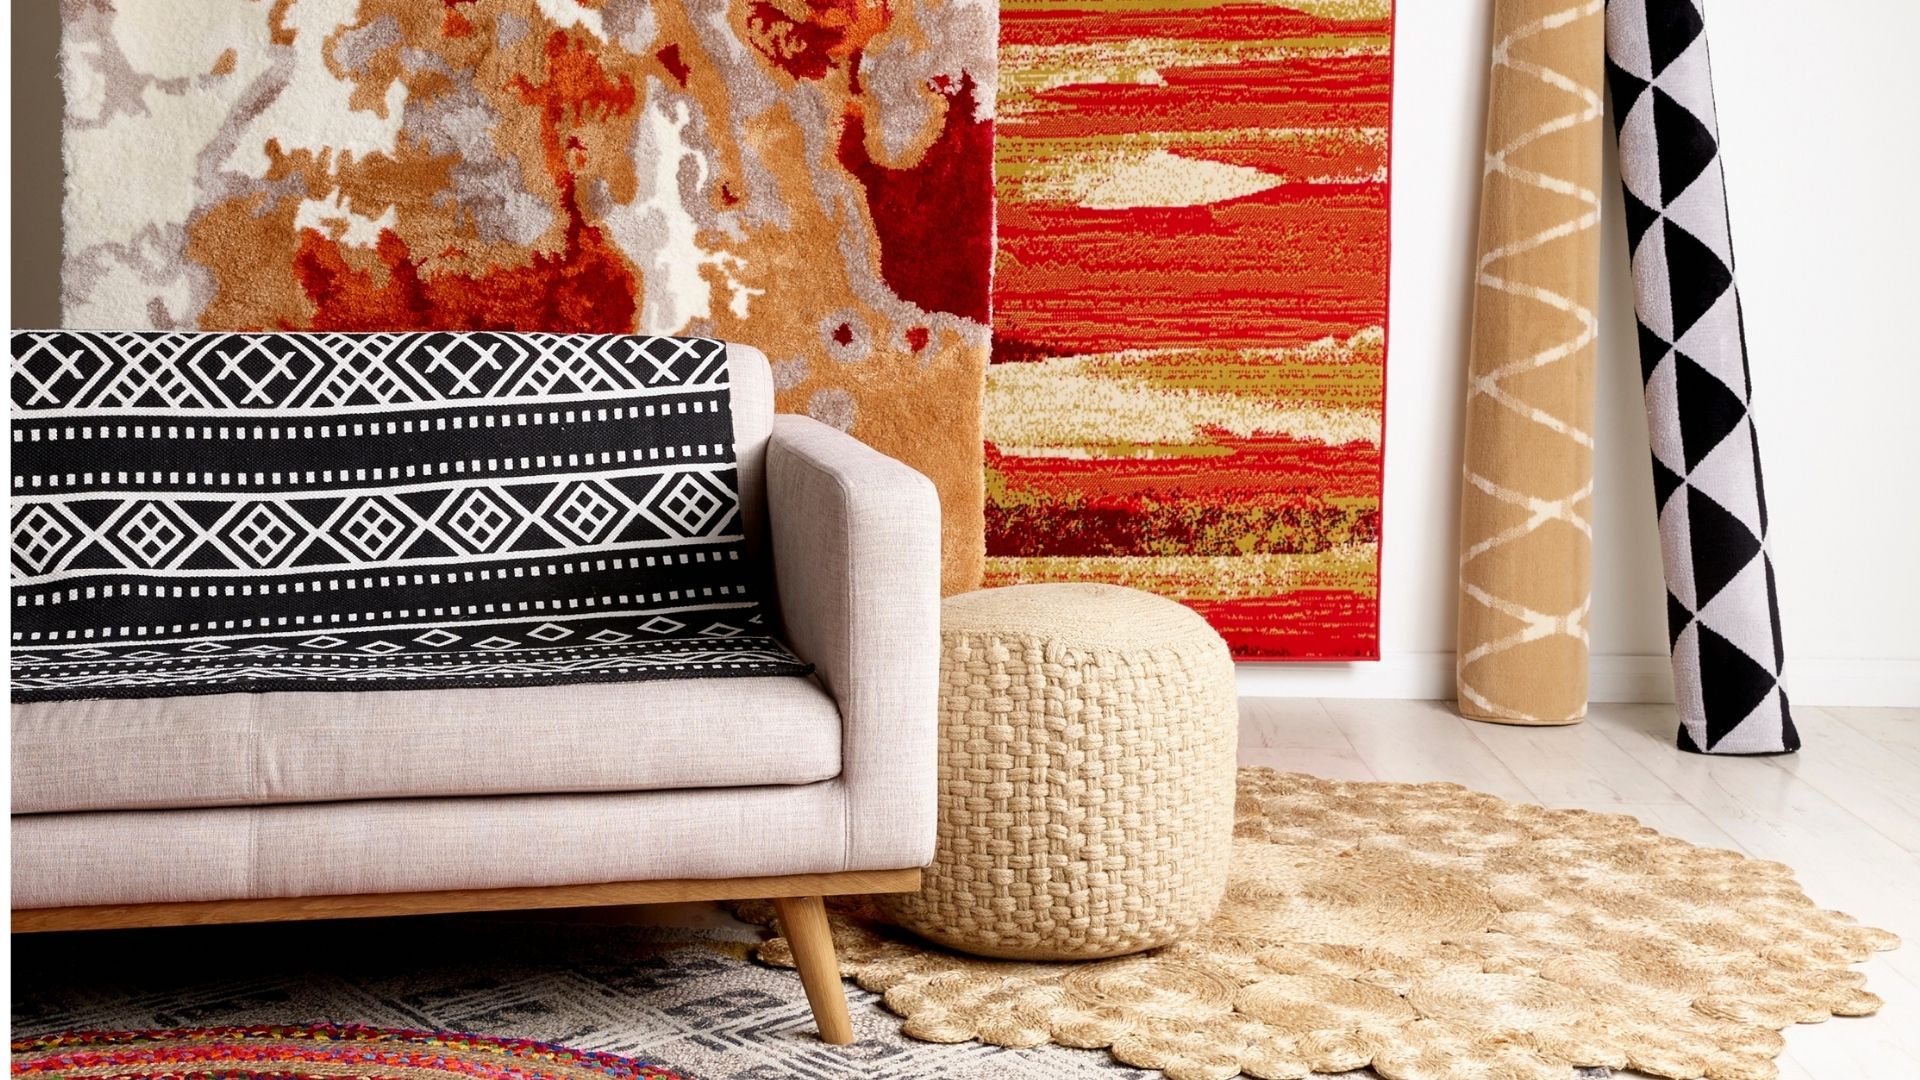 Assortment of modern patterned rugs